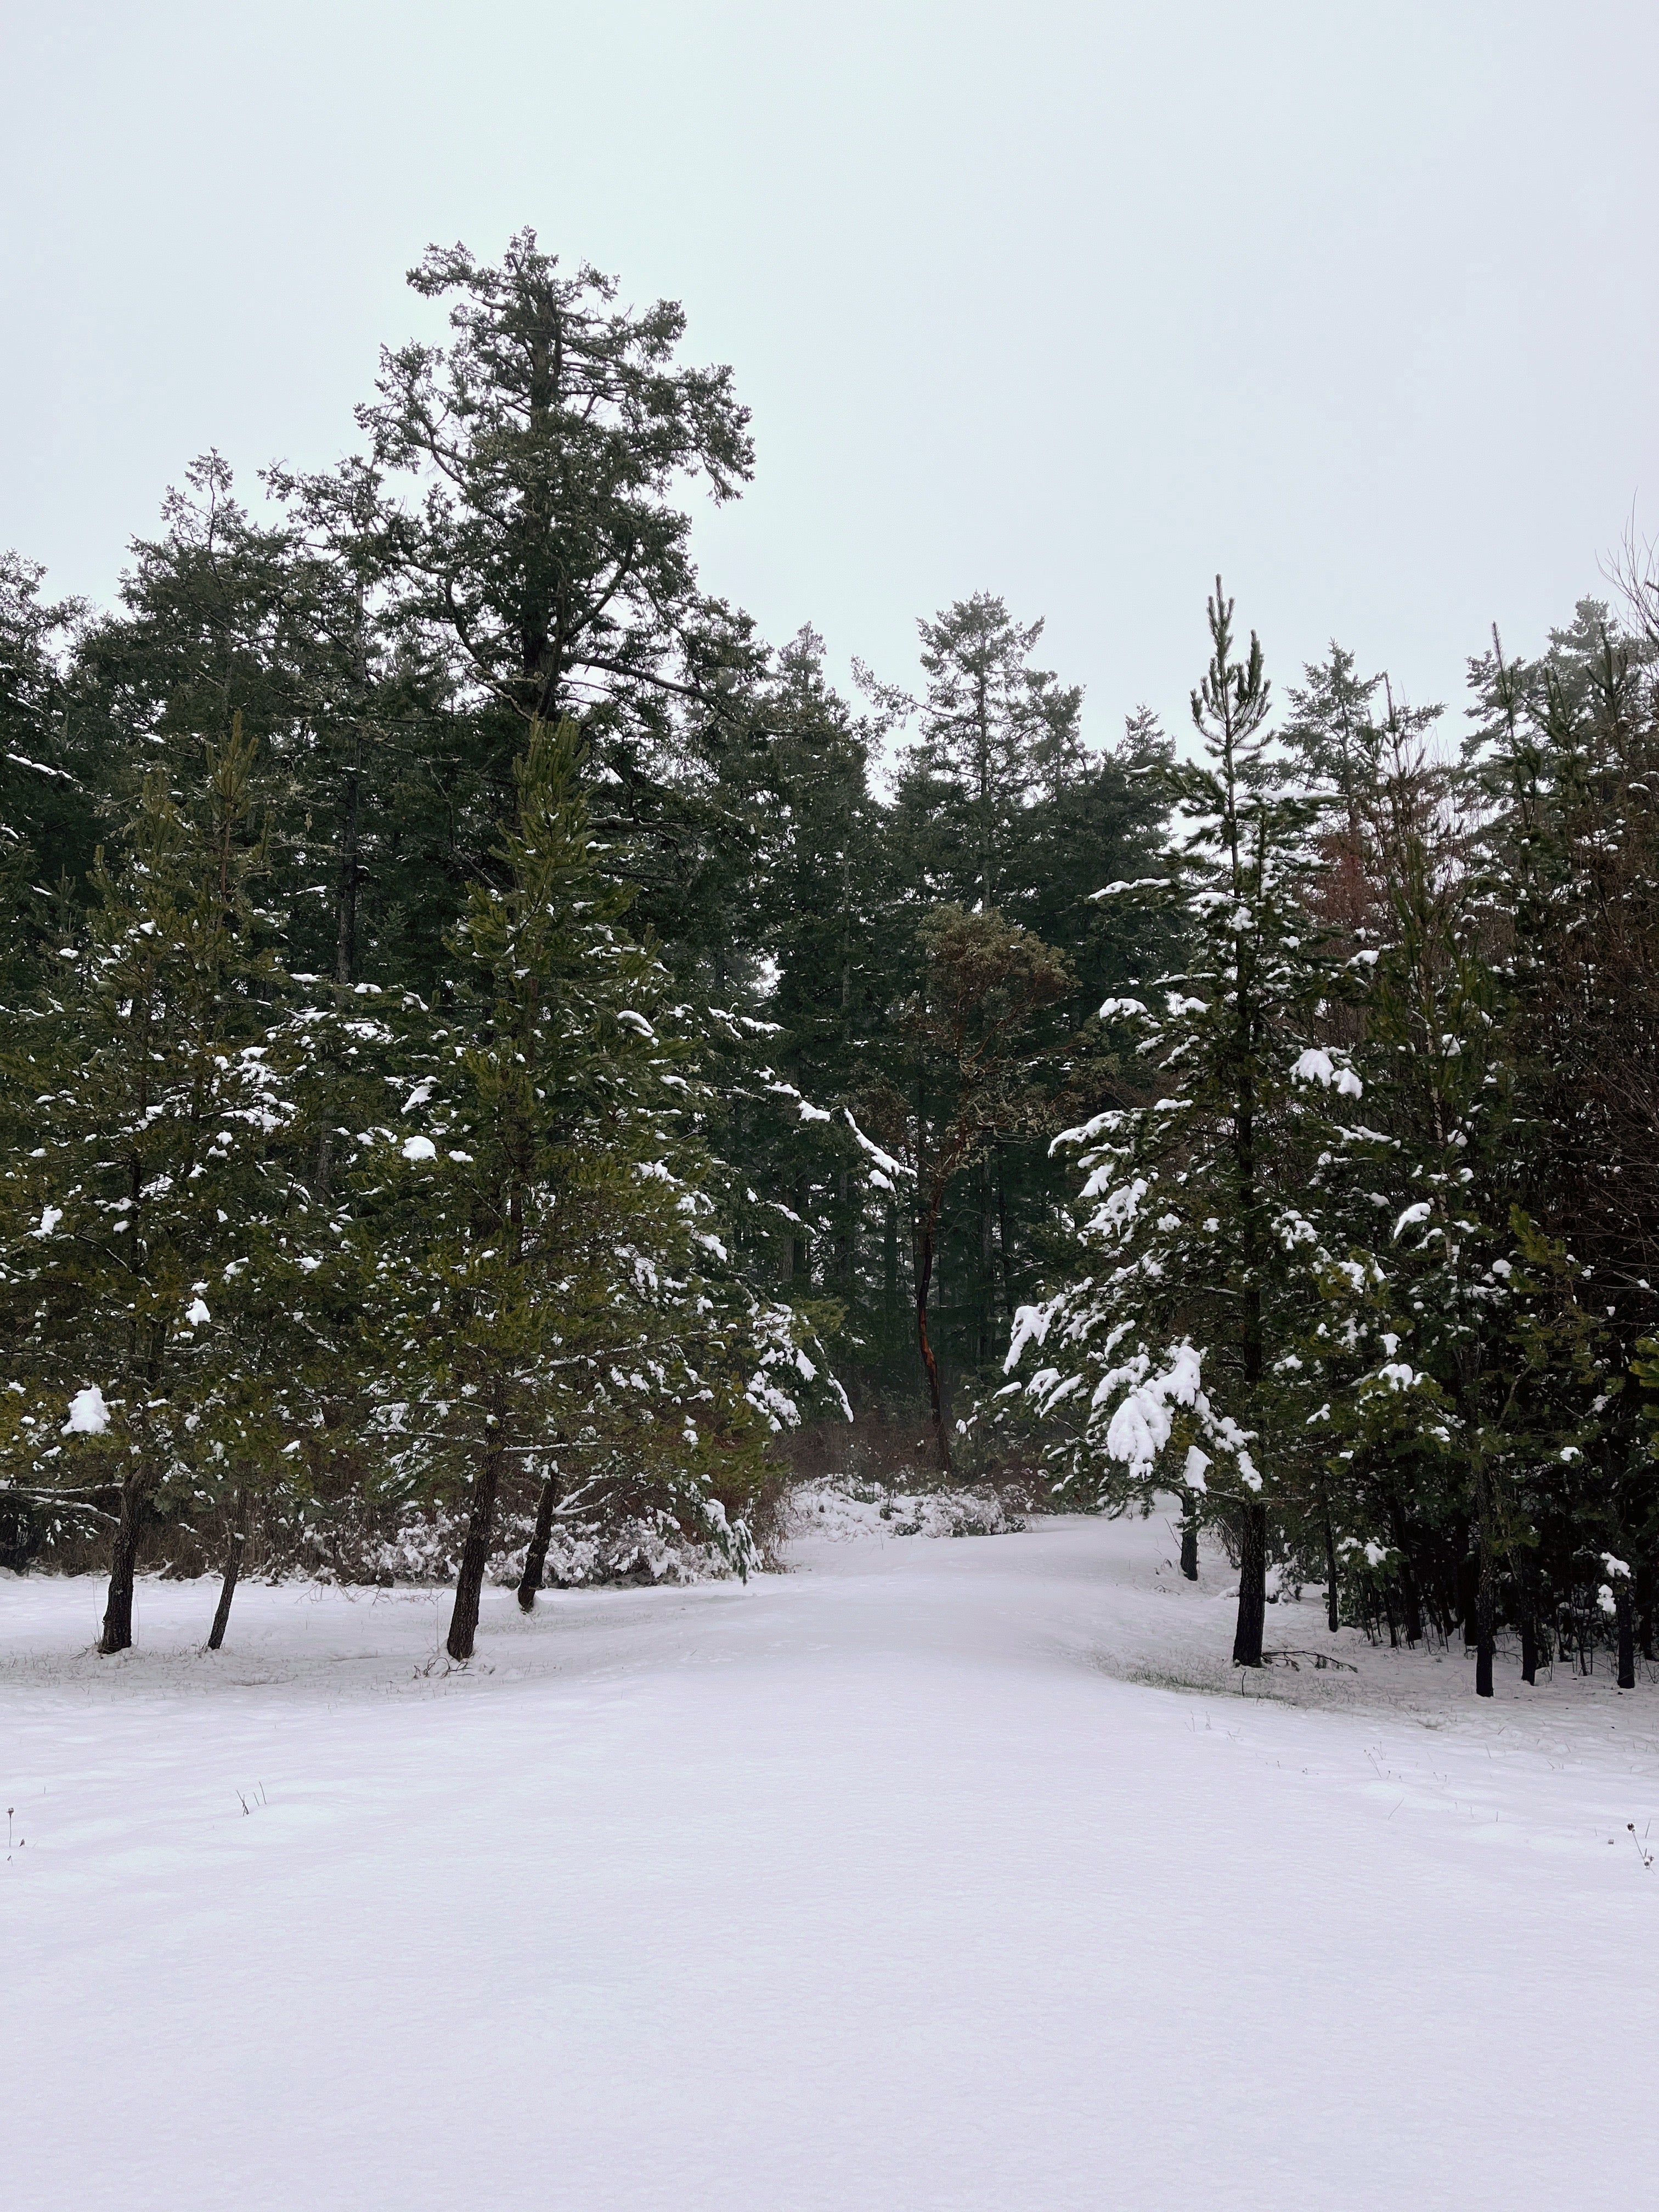 An image of pines in the fresh white snow.